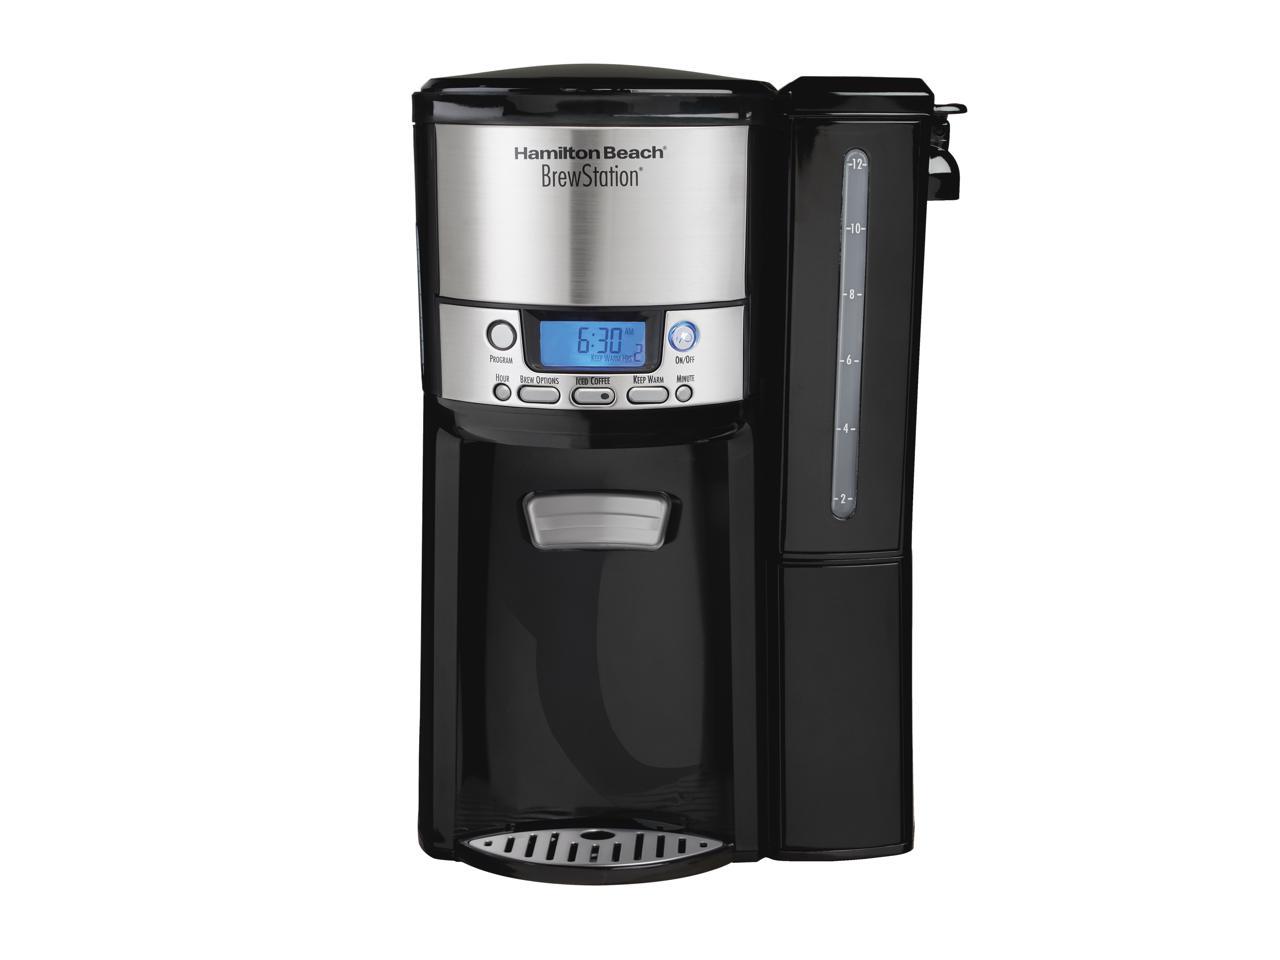 Hamilton Beach BrewStation 12 Cup Coffee Maker with Internal Heating, Black - image 1 of 6